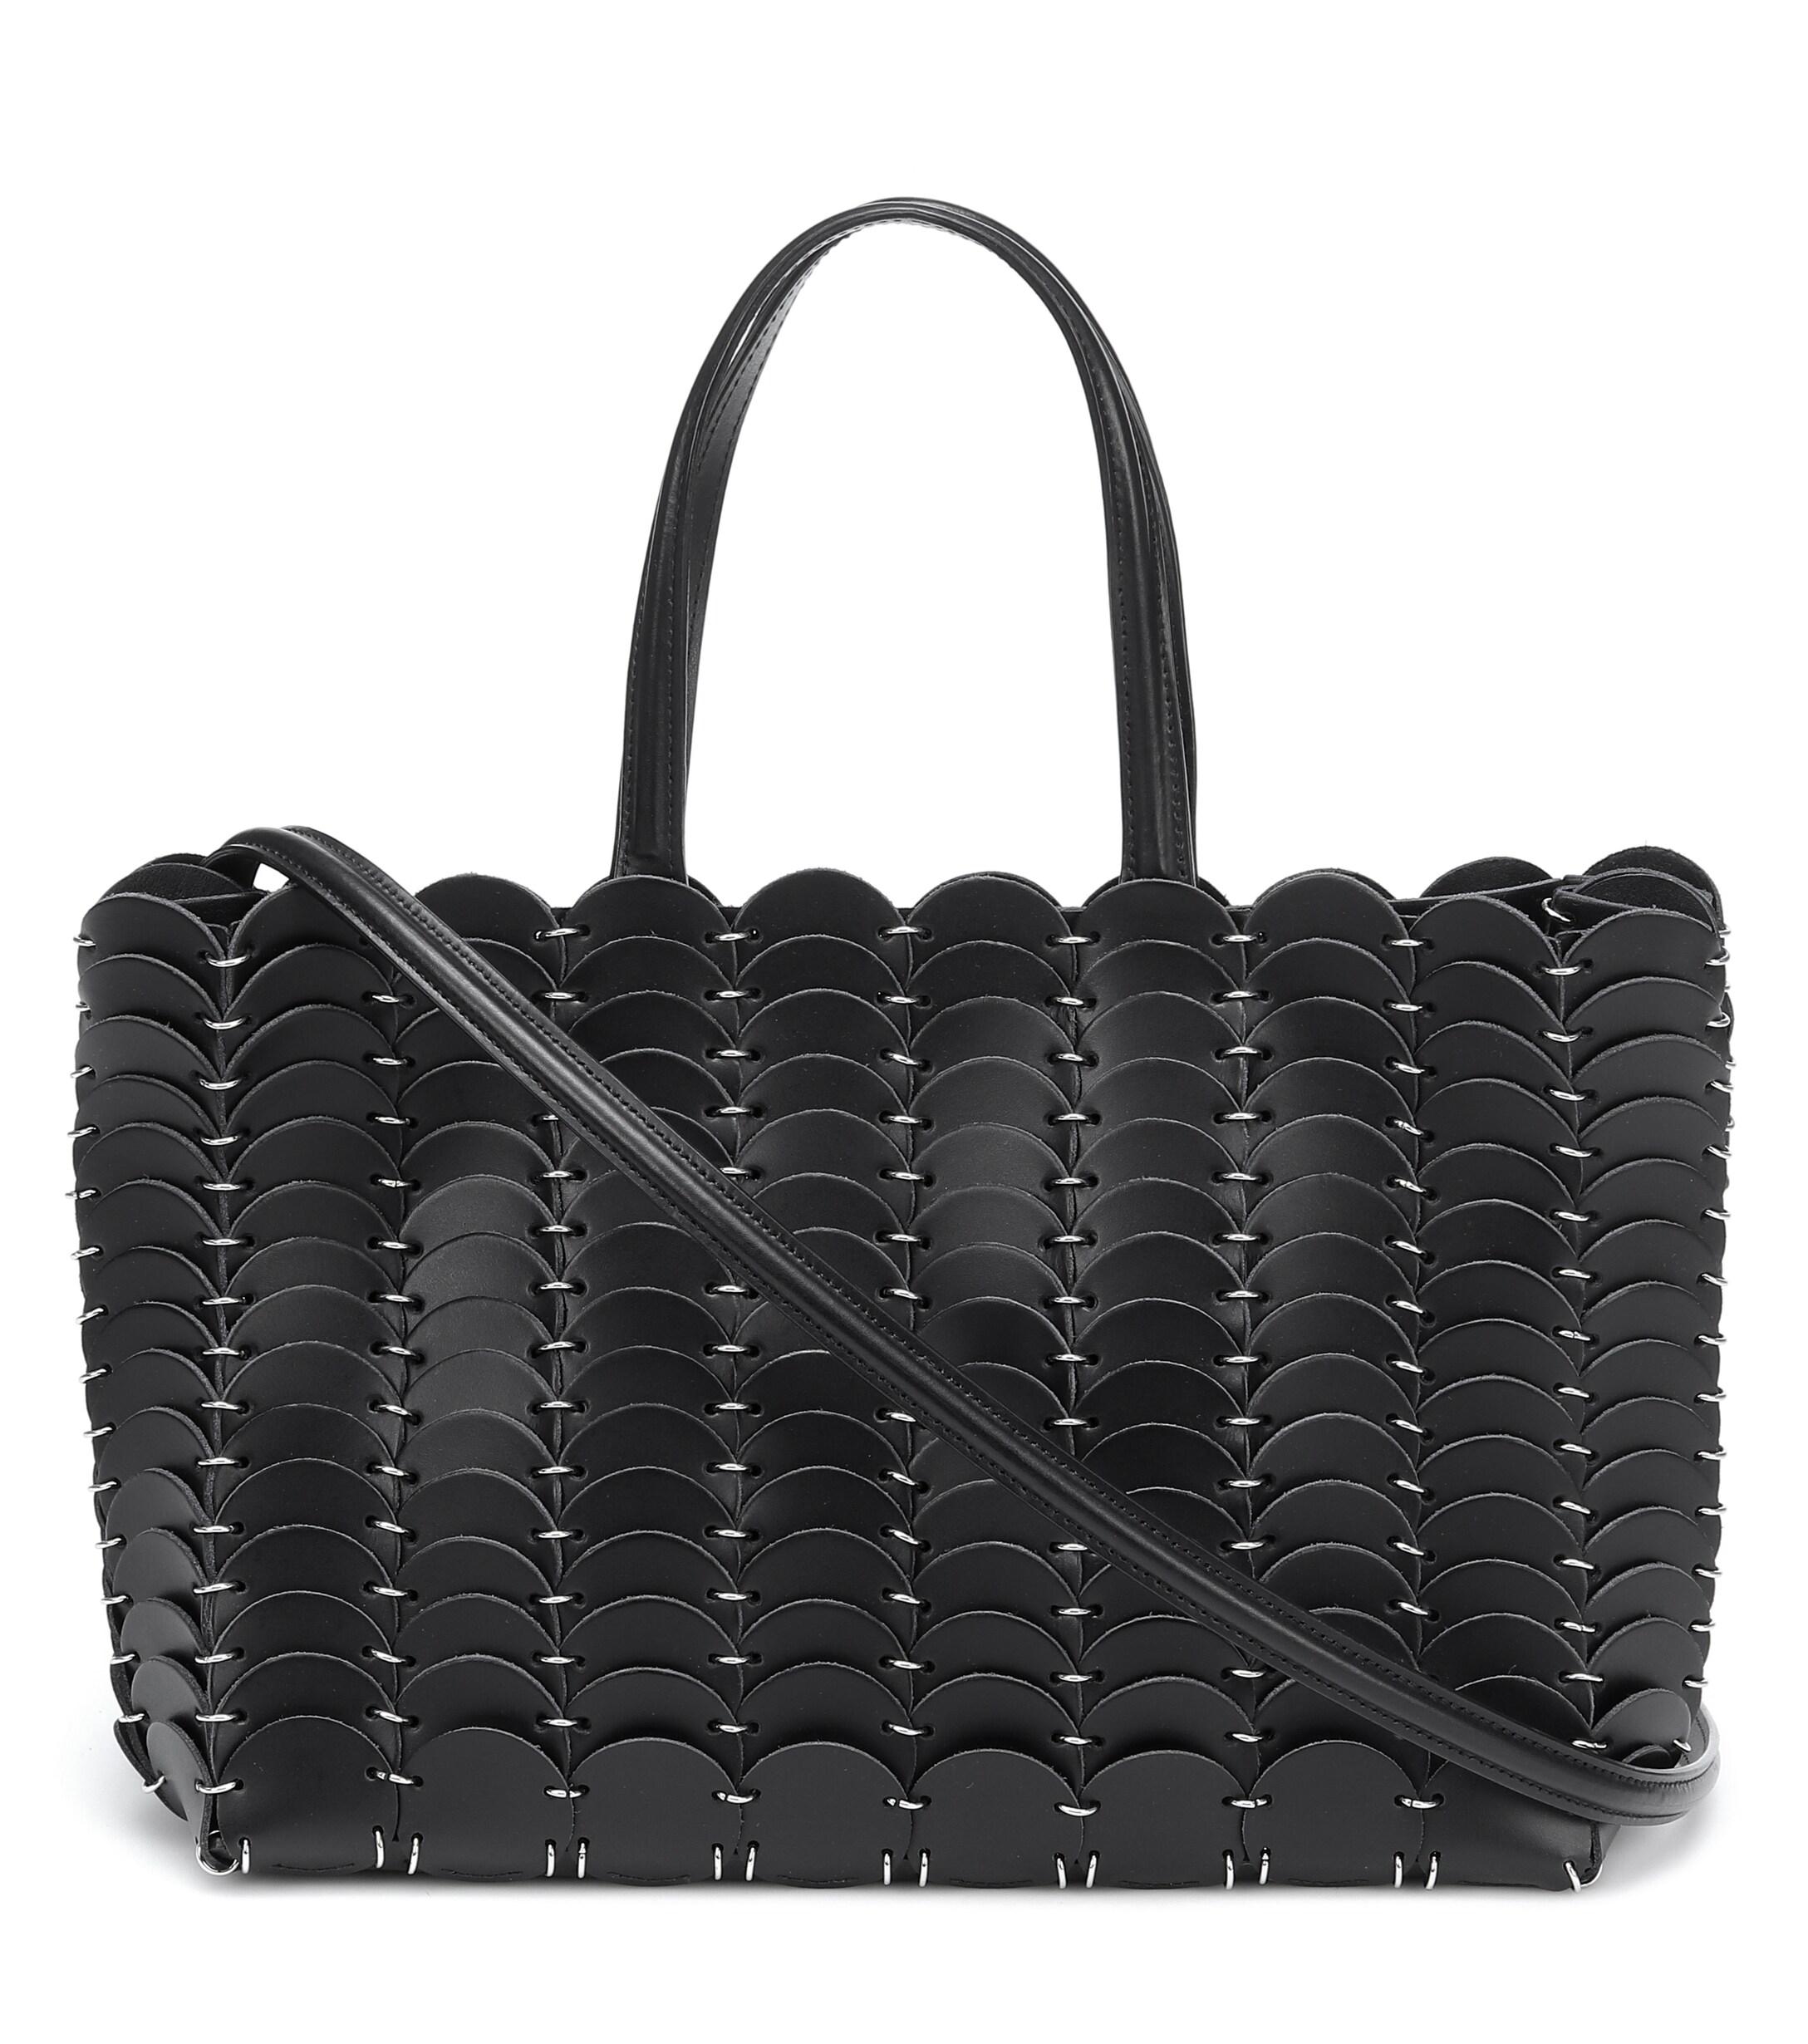 Paco Rabanne Pacoïo Leather Tote in Black - Lyst